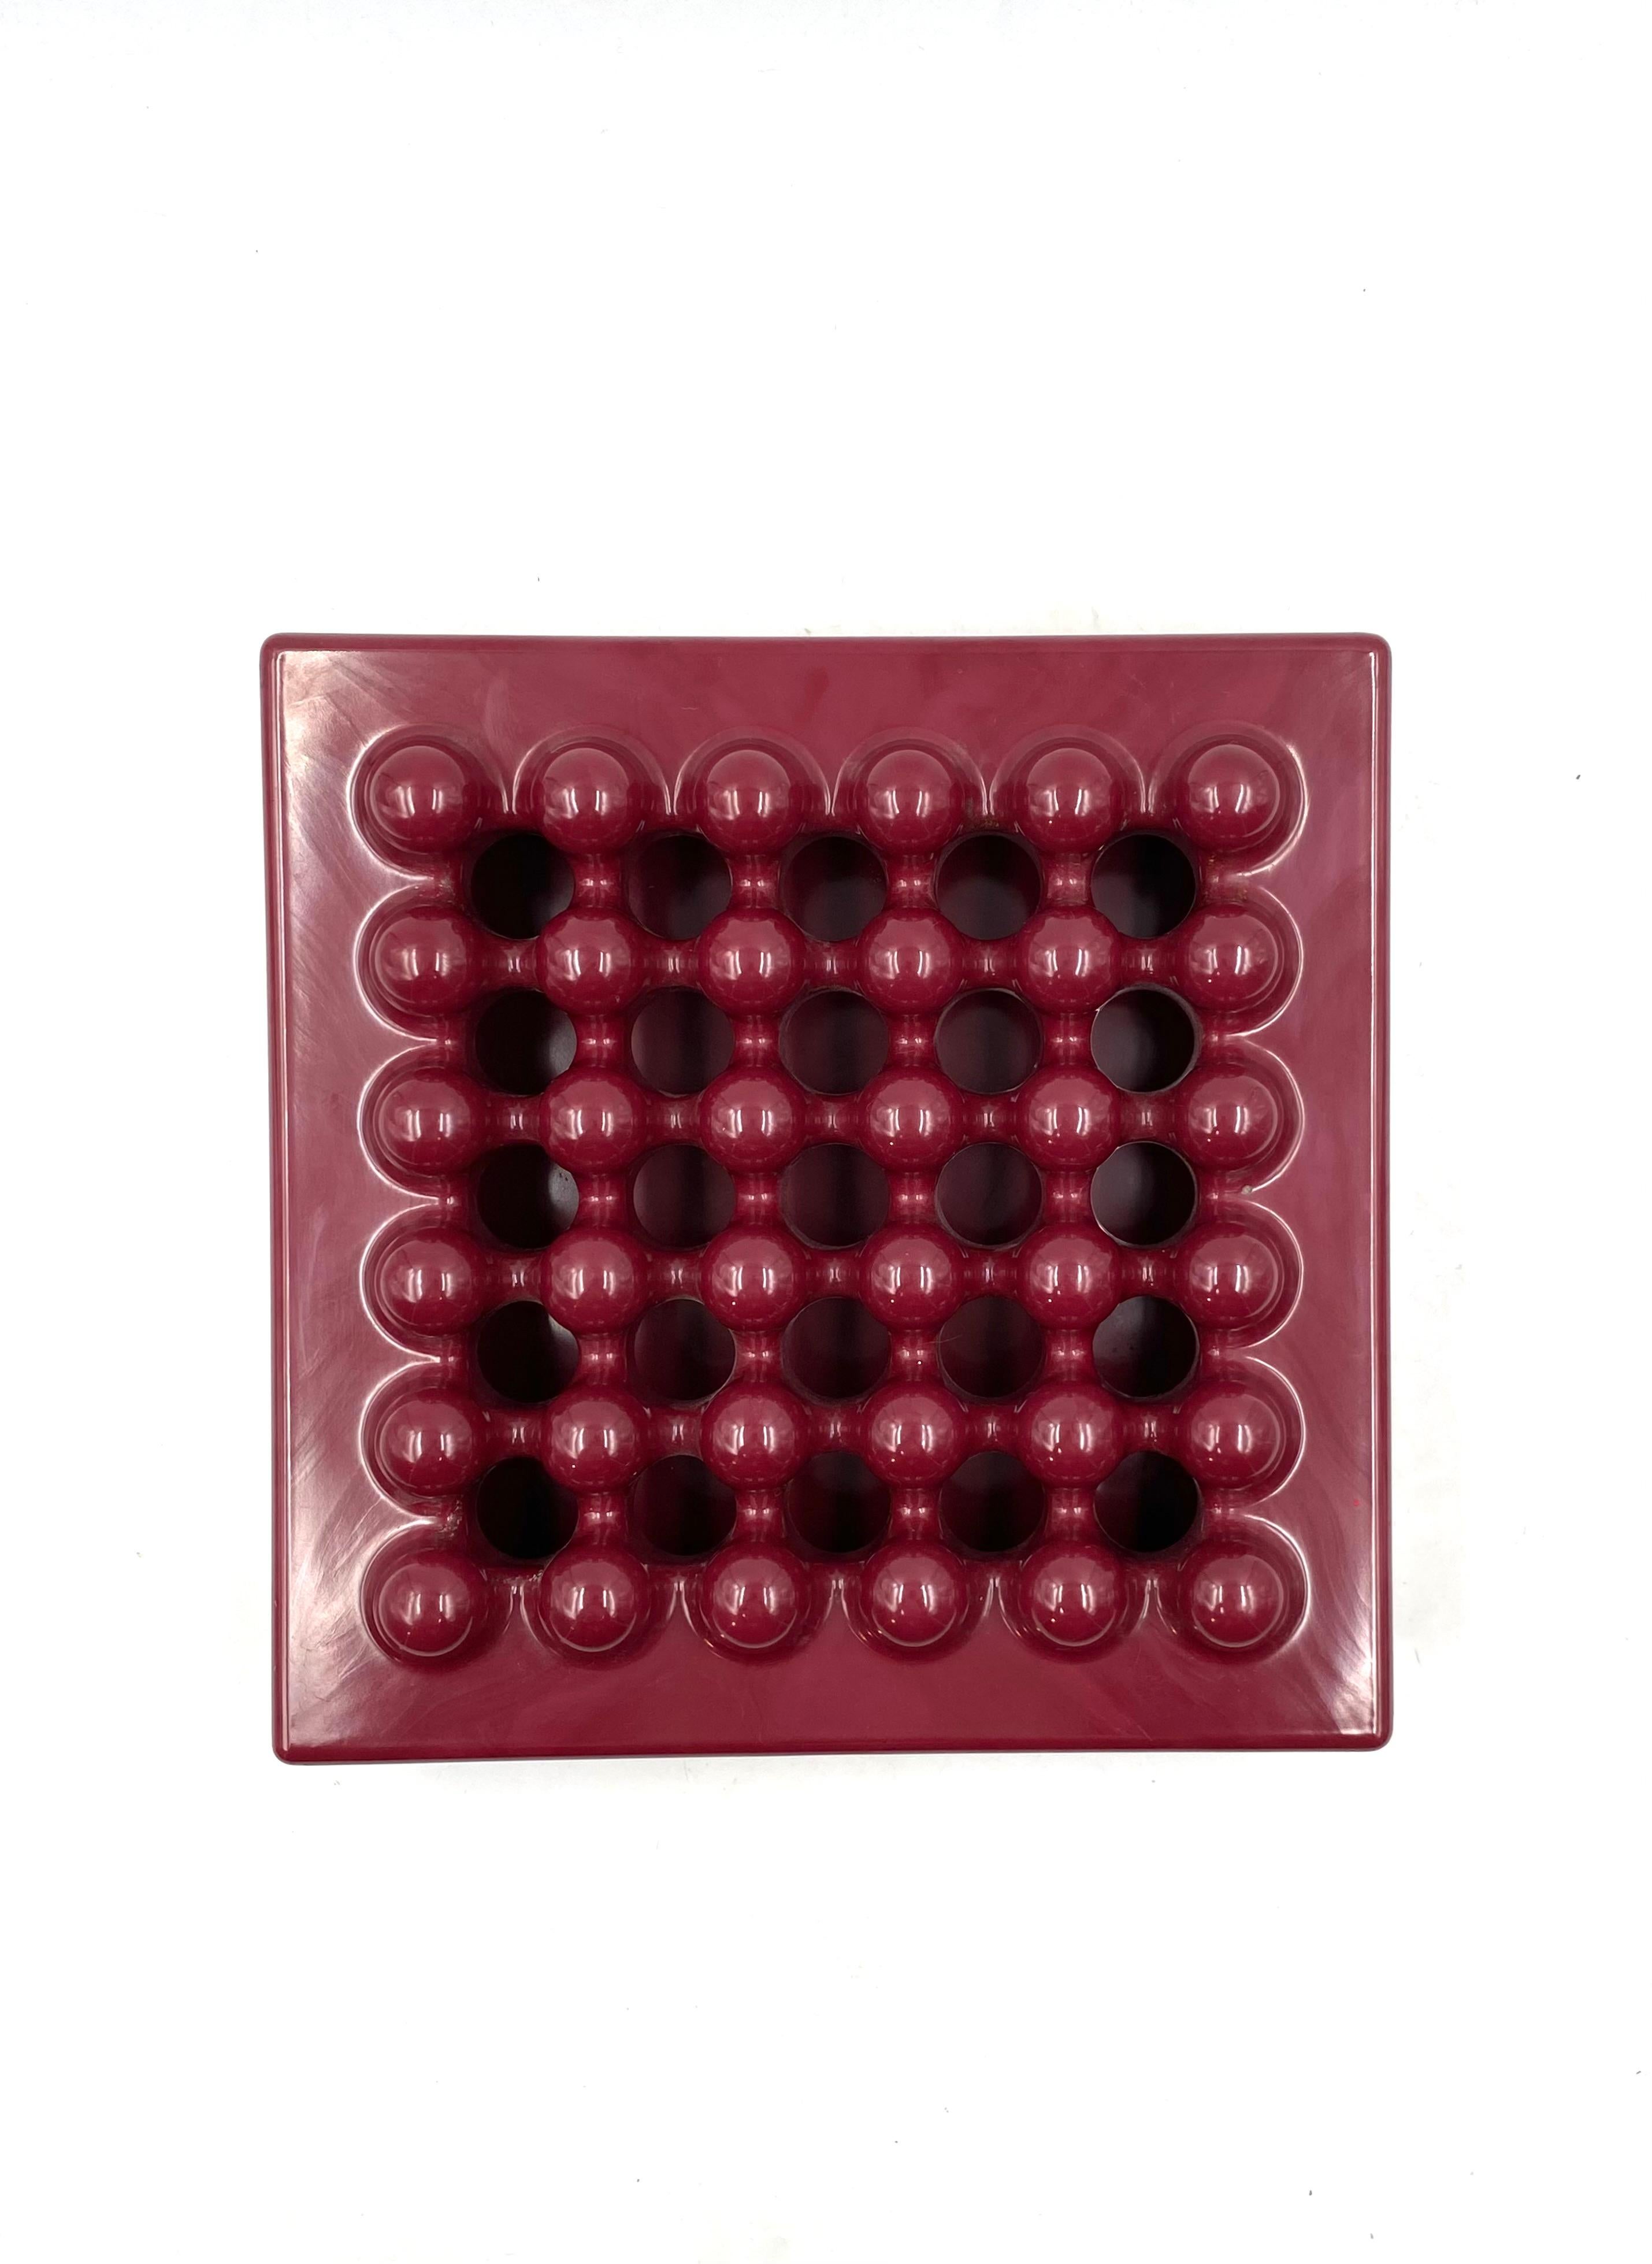 Plastique Ettore Sottsass, grand cendrier rouge, Olivetti Synthesis, série Sistema 45, 1971